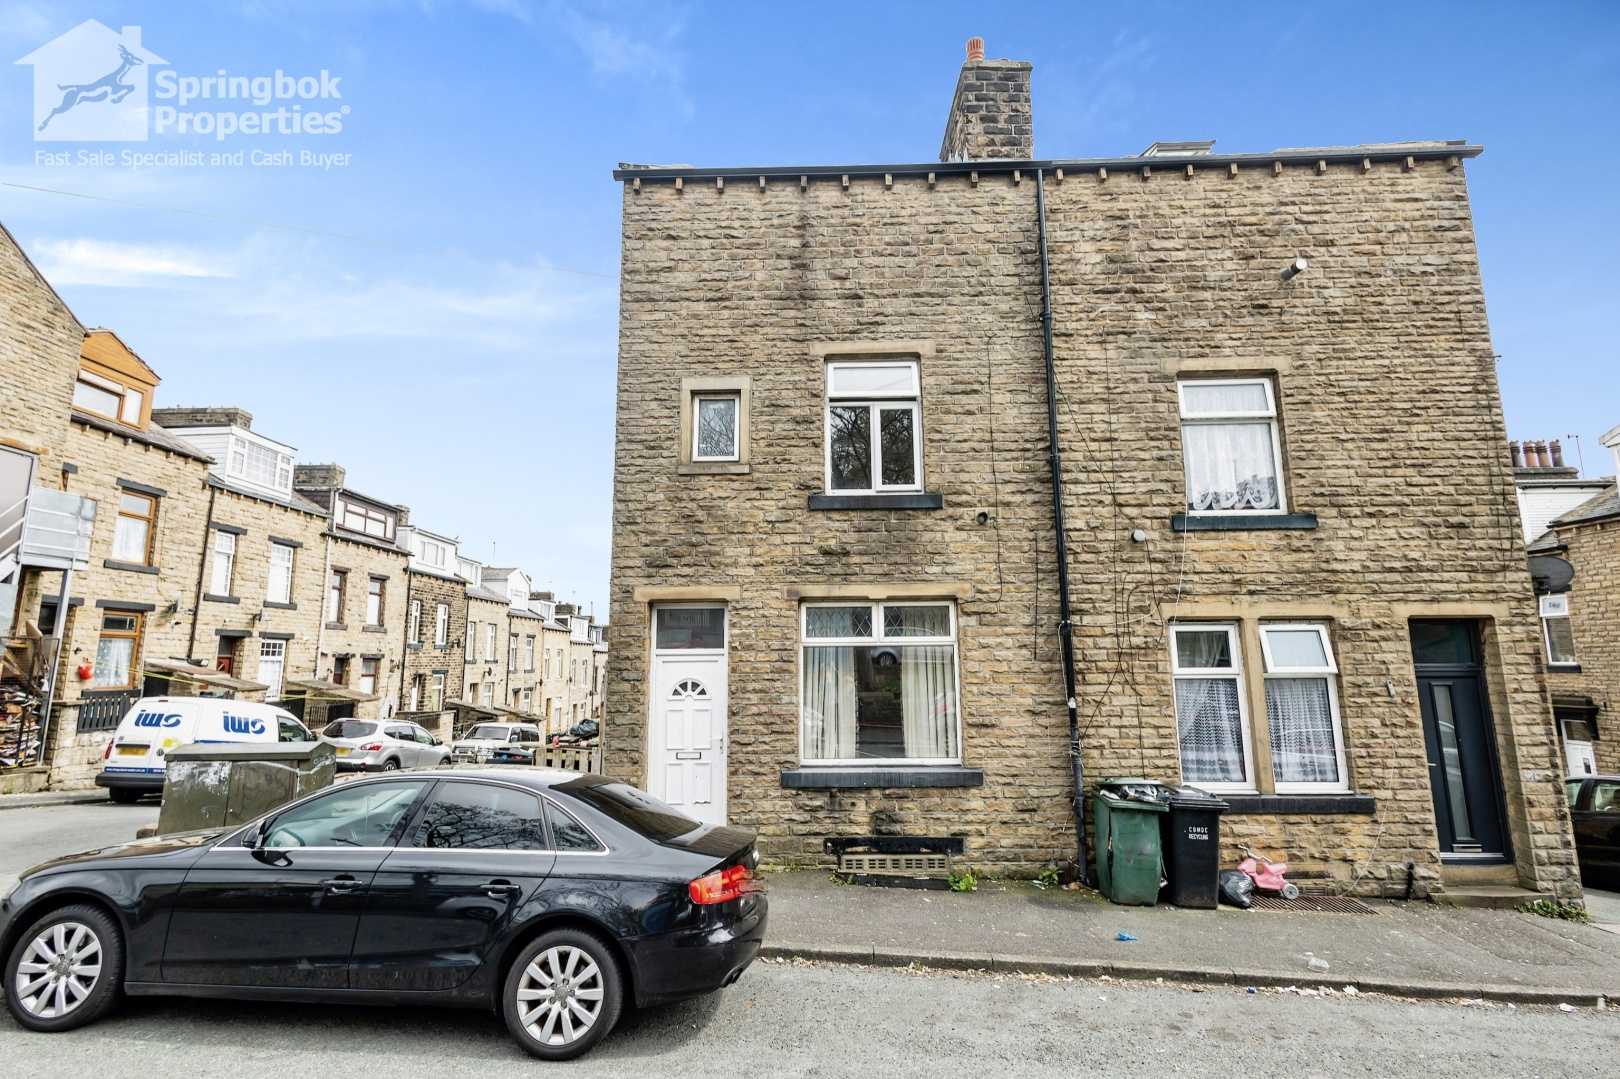 House in Keighley, Bradford 11721324